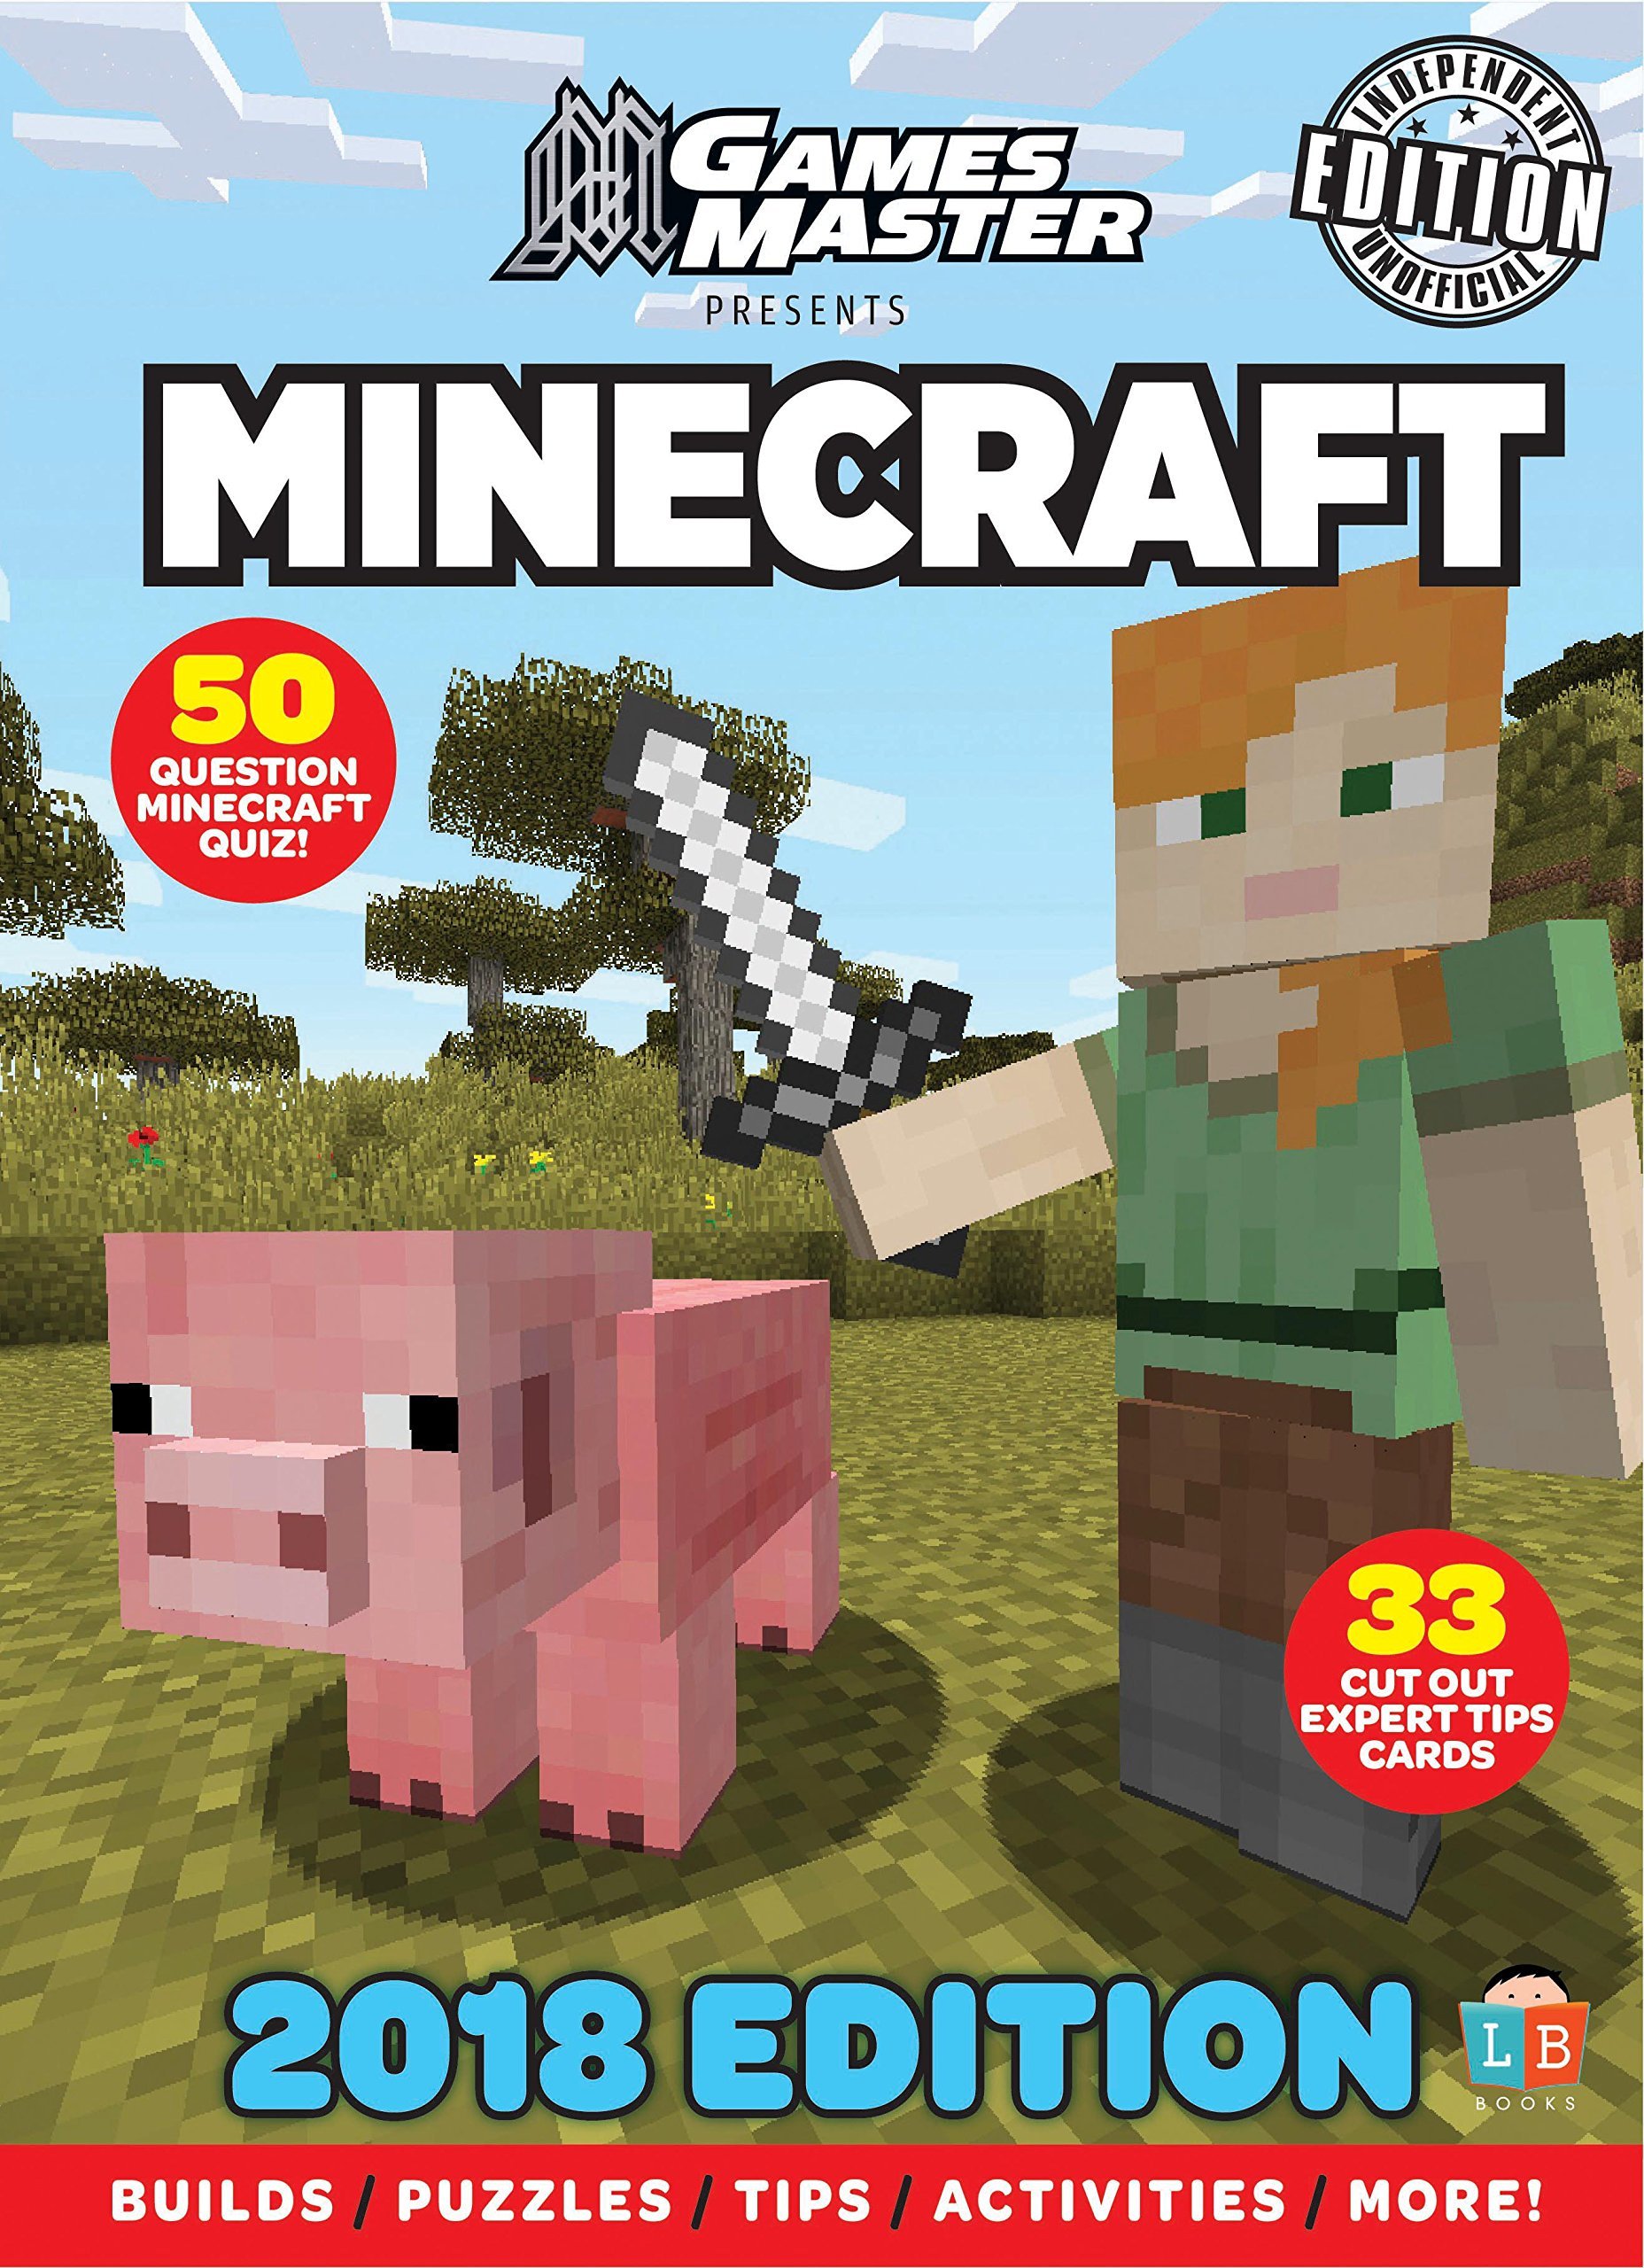 GamesMaster Presents: The Ultimate Guide to Minecraft 2018 Edition